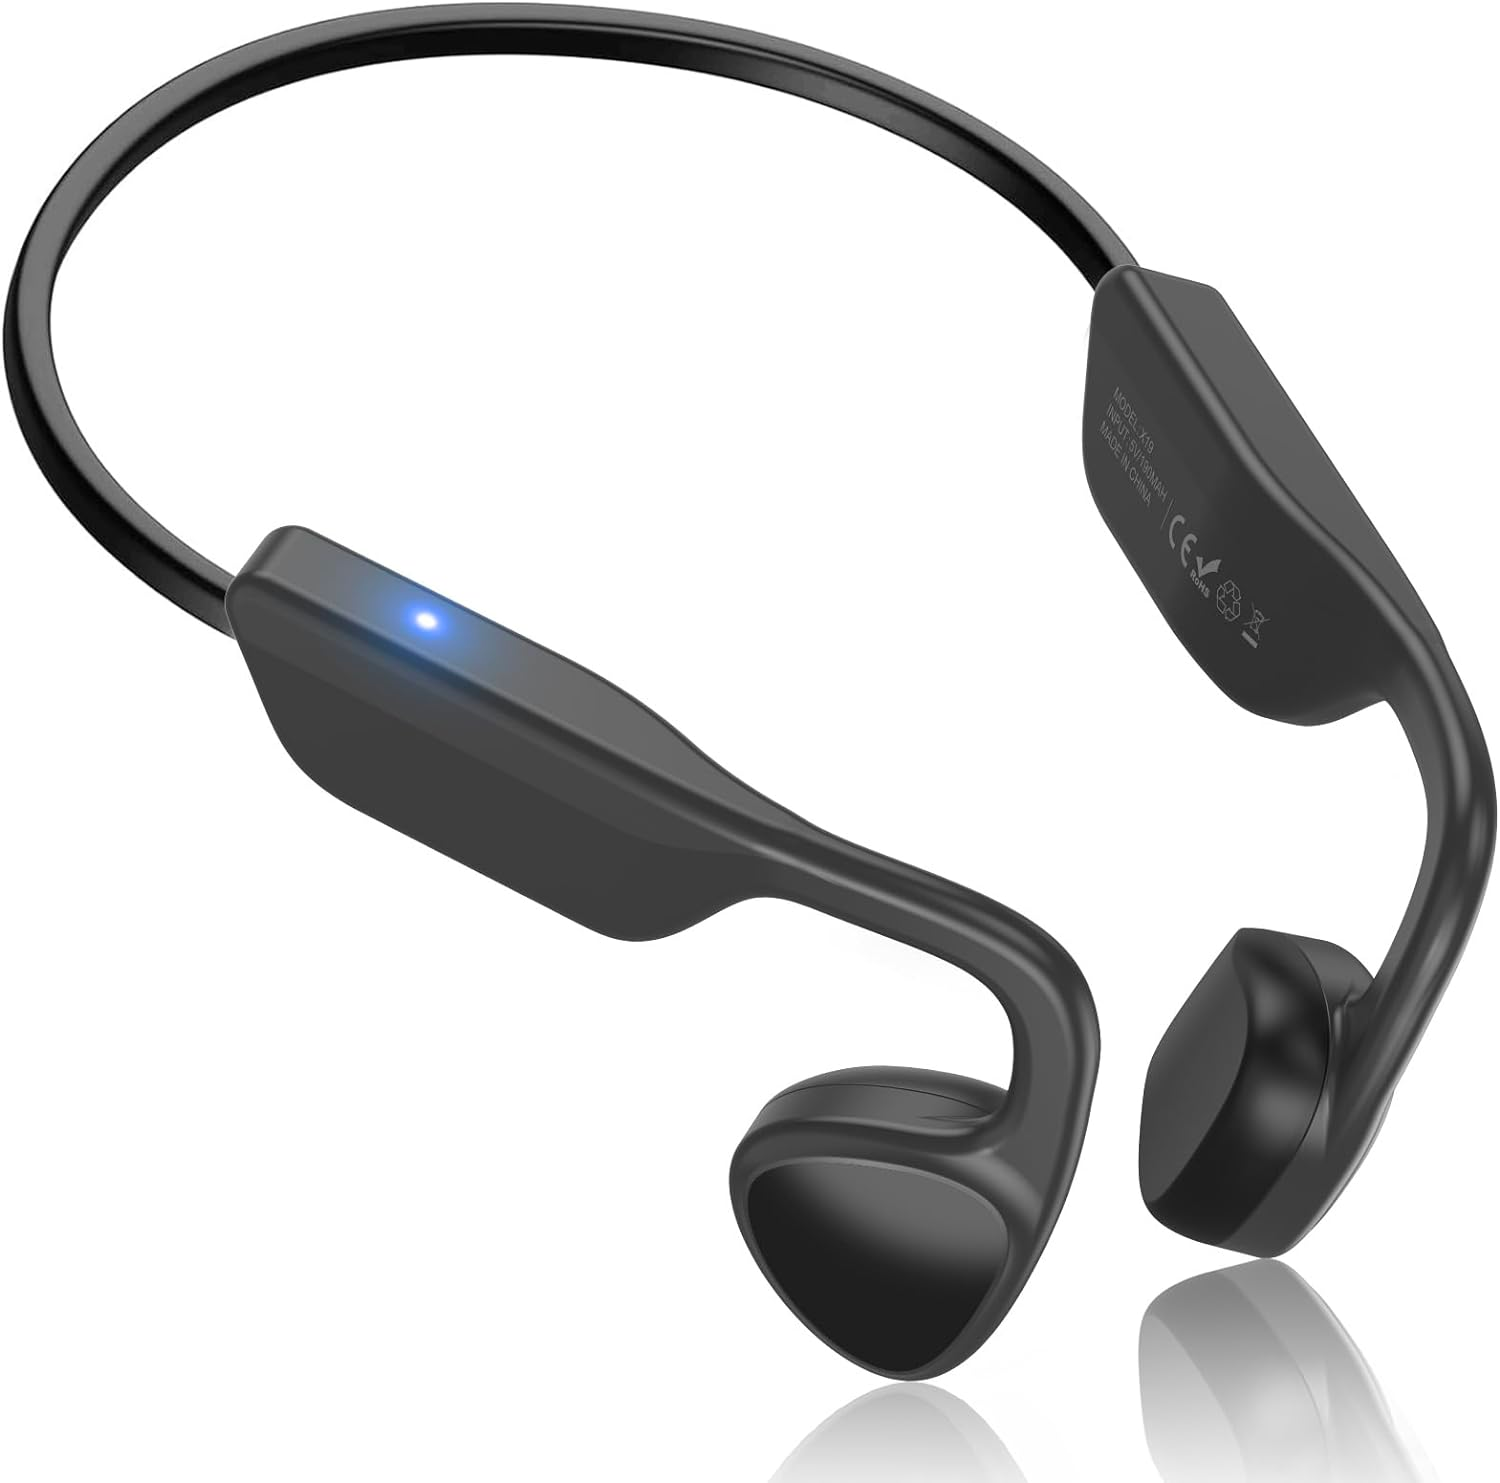 Amazon now sells bone conduction headphones, which use a new technology to send sound through the bones of the head instead of the ear canal. The open-ear design of these headphones lets people 